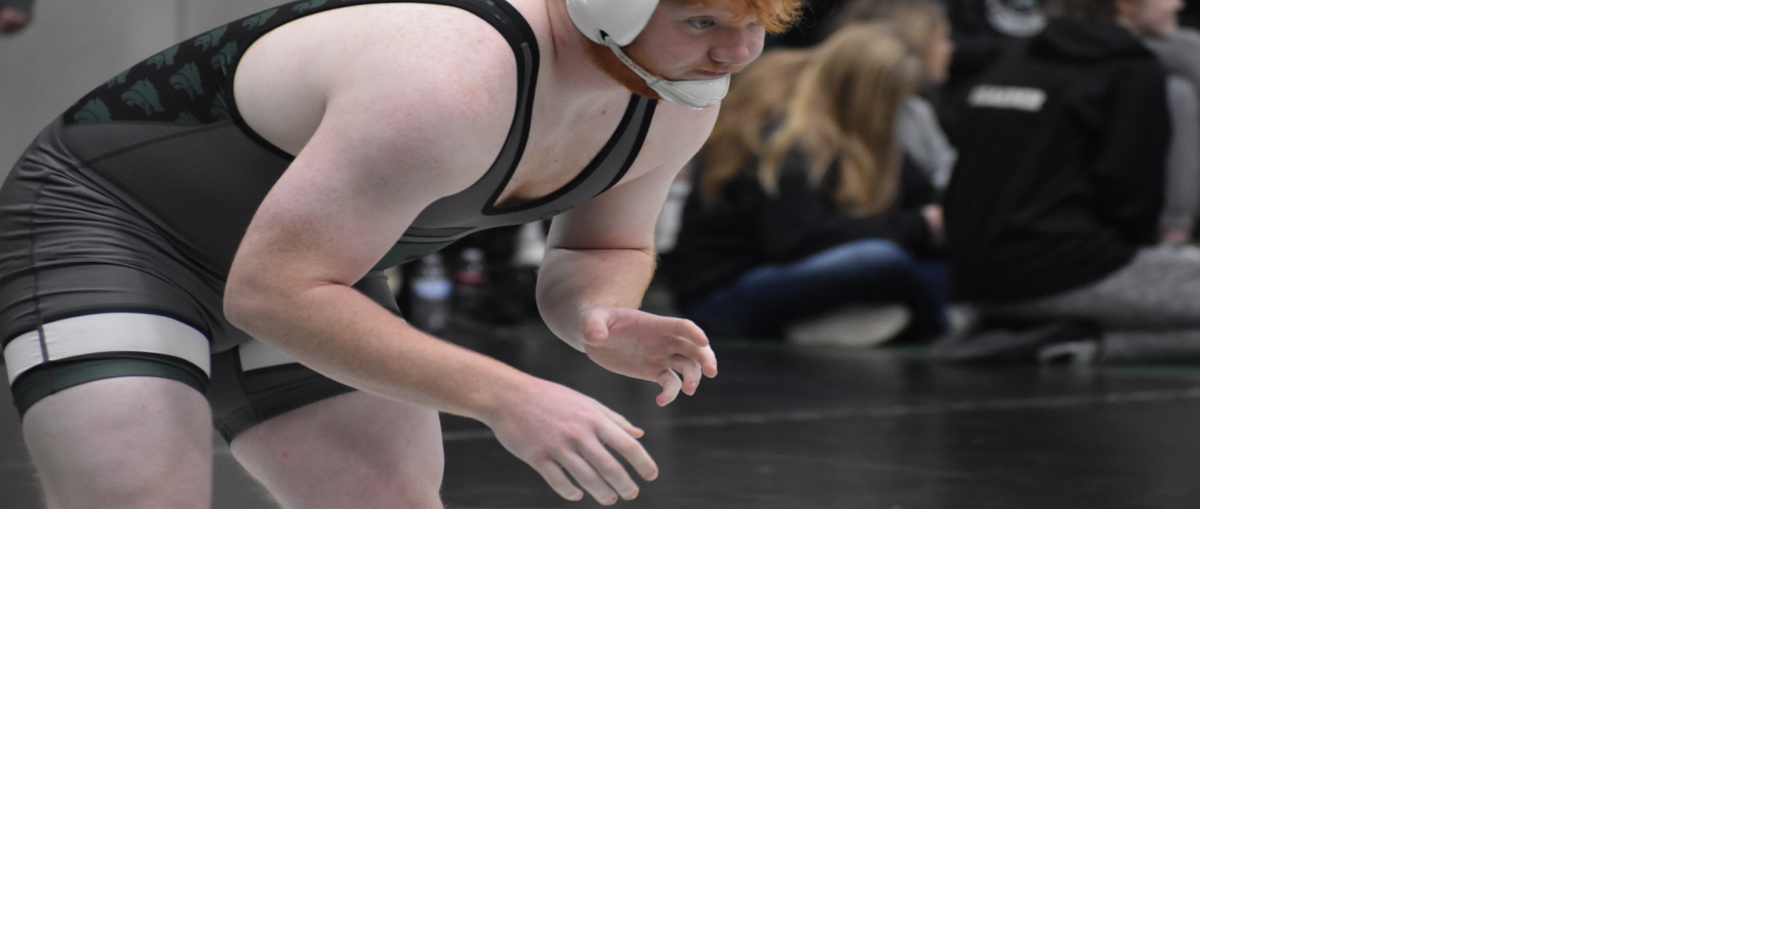 Wolves place 2nd, Lady Wolves finish 7th at annual Ron Thon Wrestling